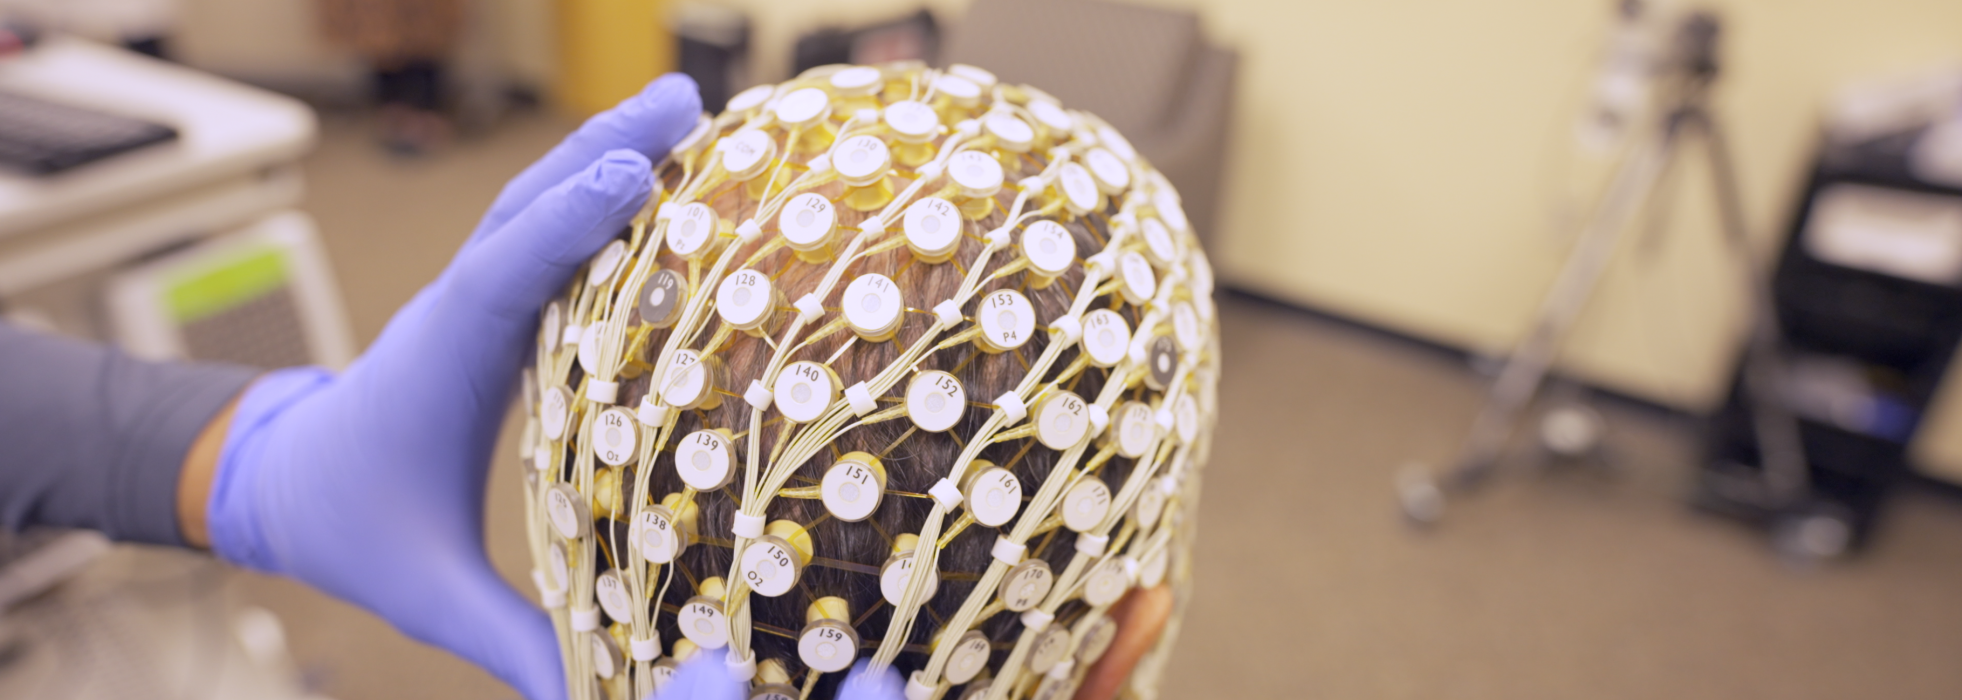 Photo of the back of a person's head with leads attached, in preparation for a sleep study